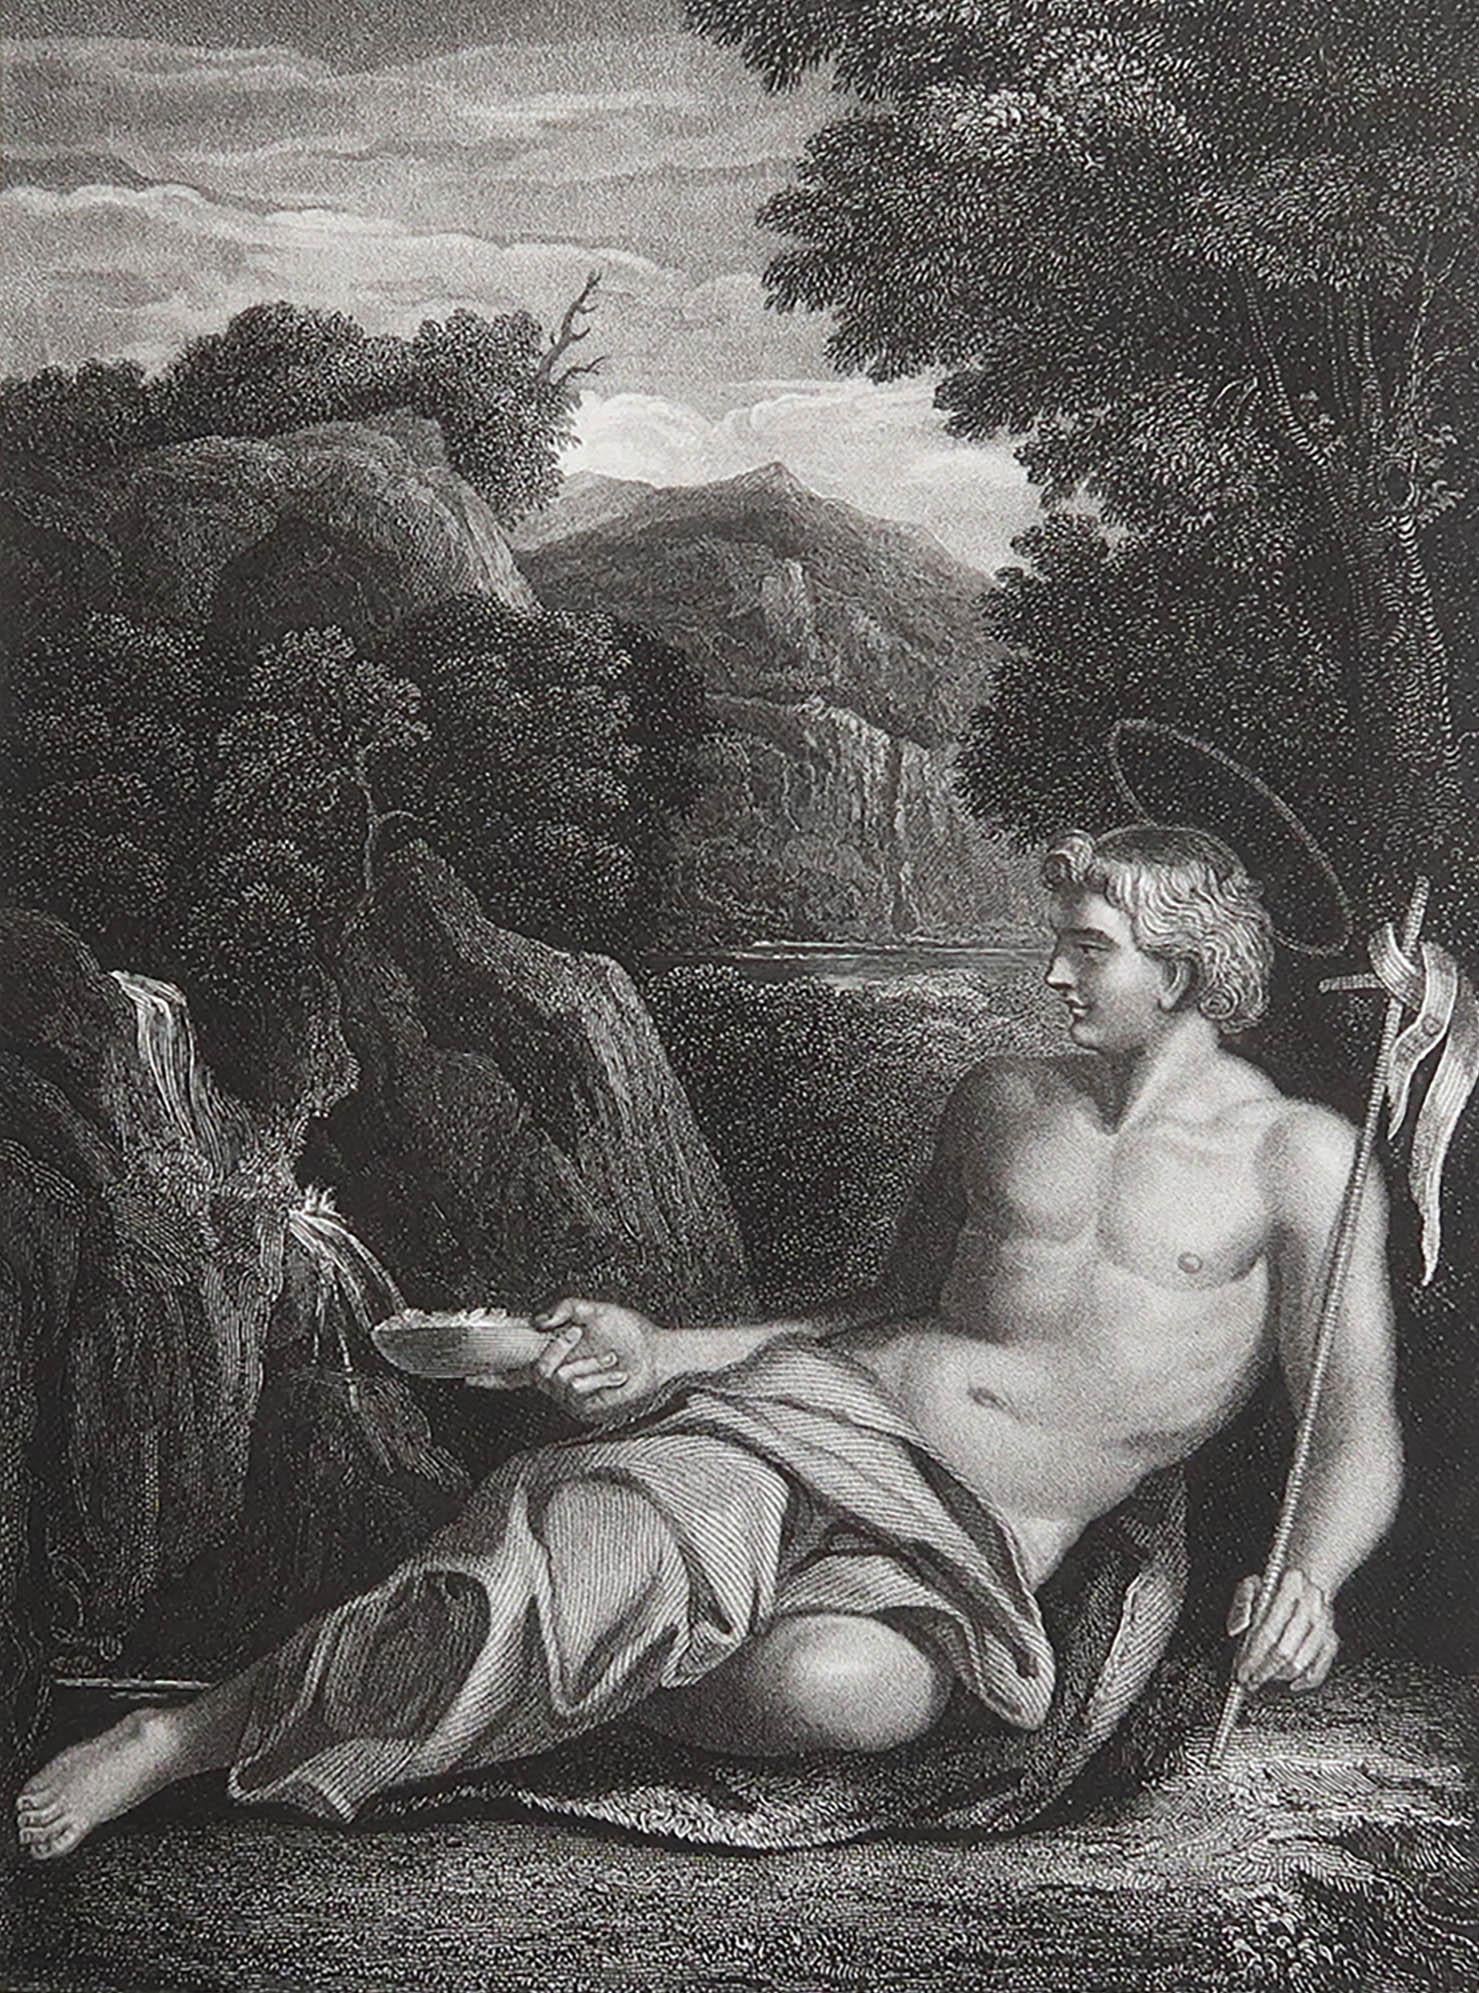 Wonderful image after Carracci

Fine Steel engraving. 

Published by Jones & Co. C.1850

Unframed.

